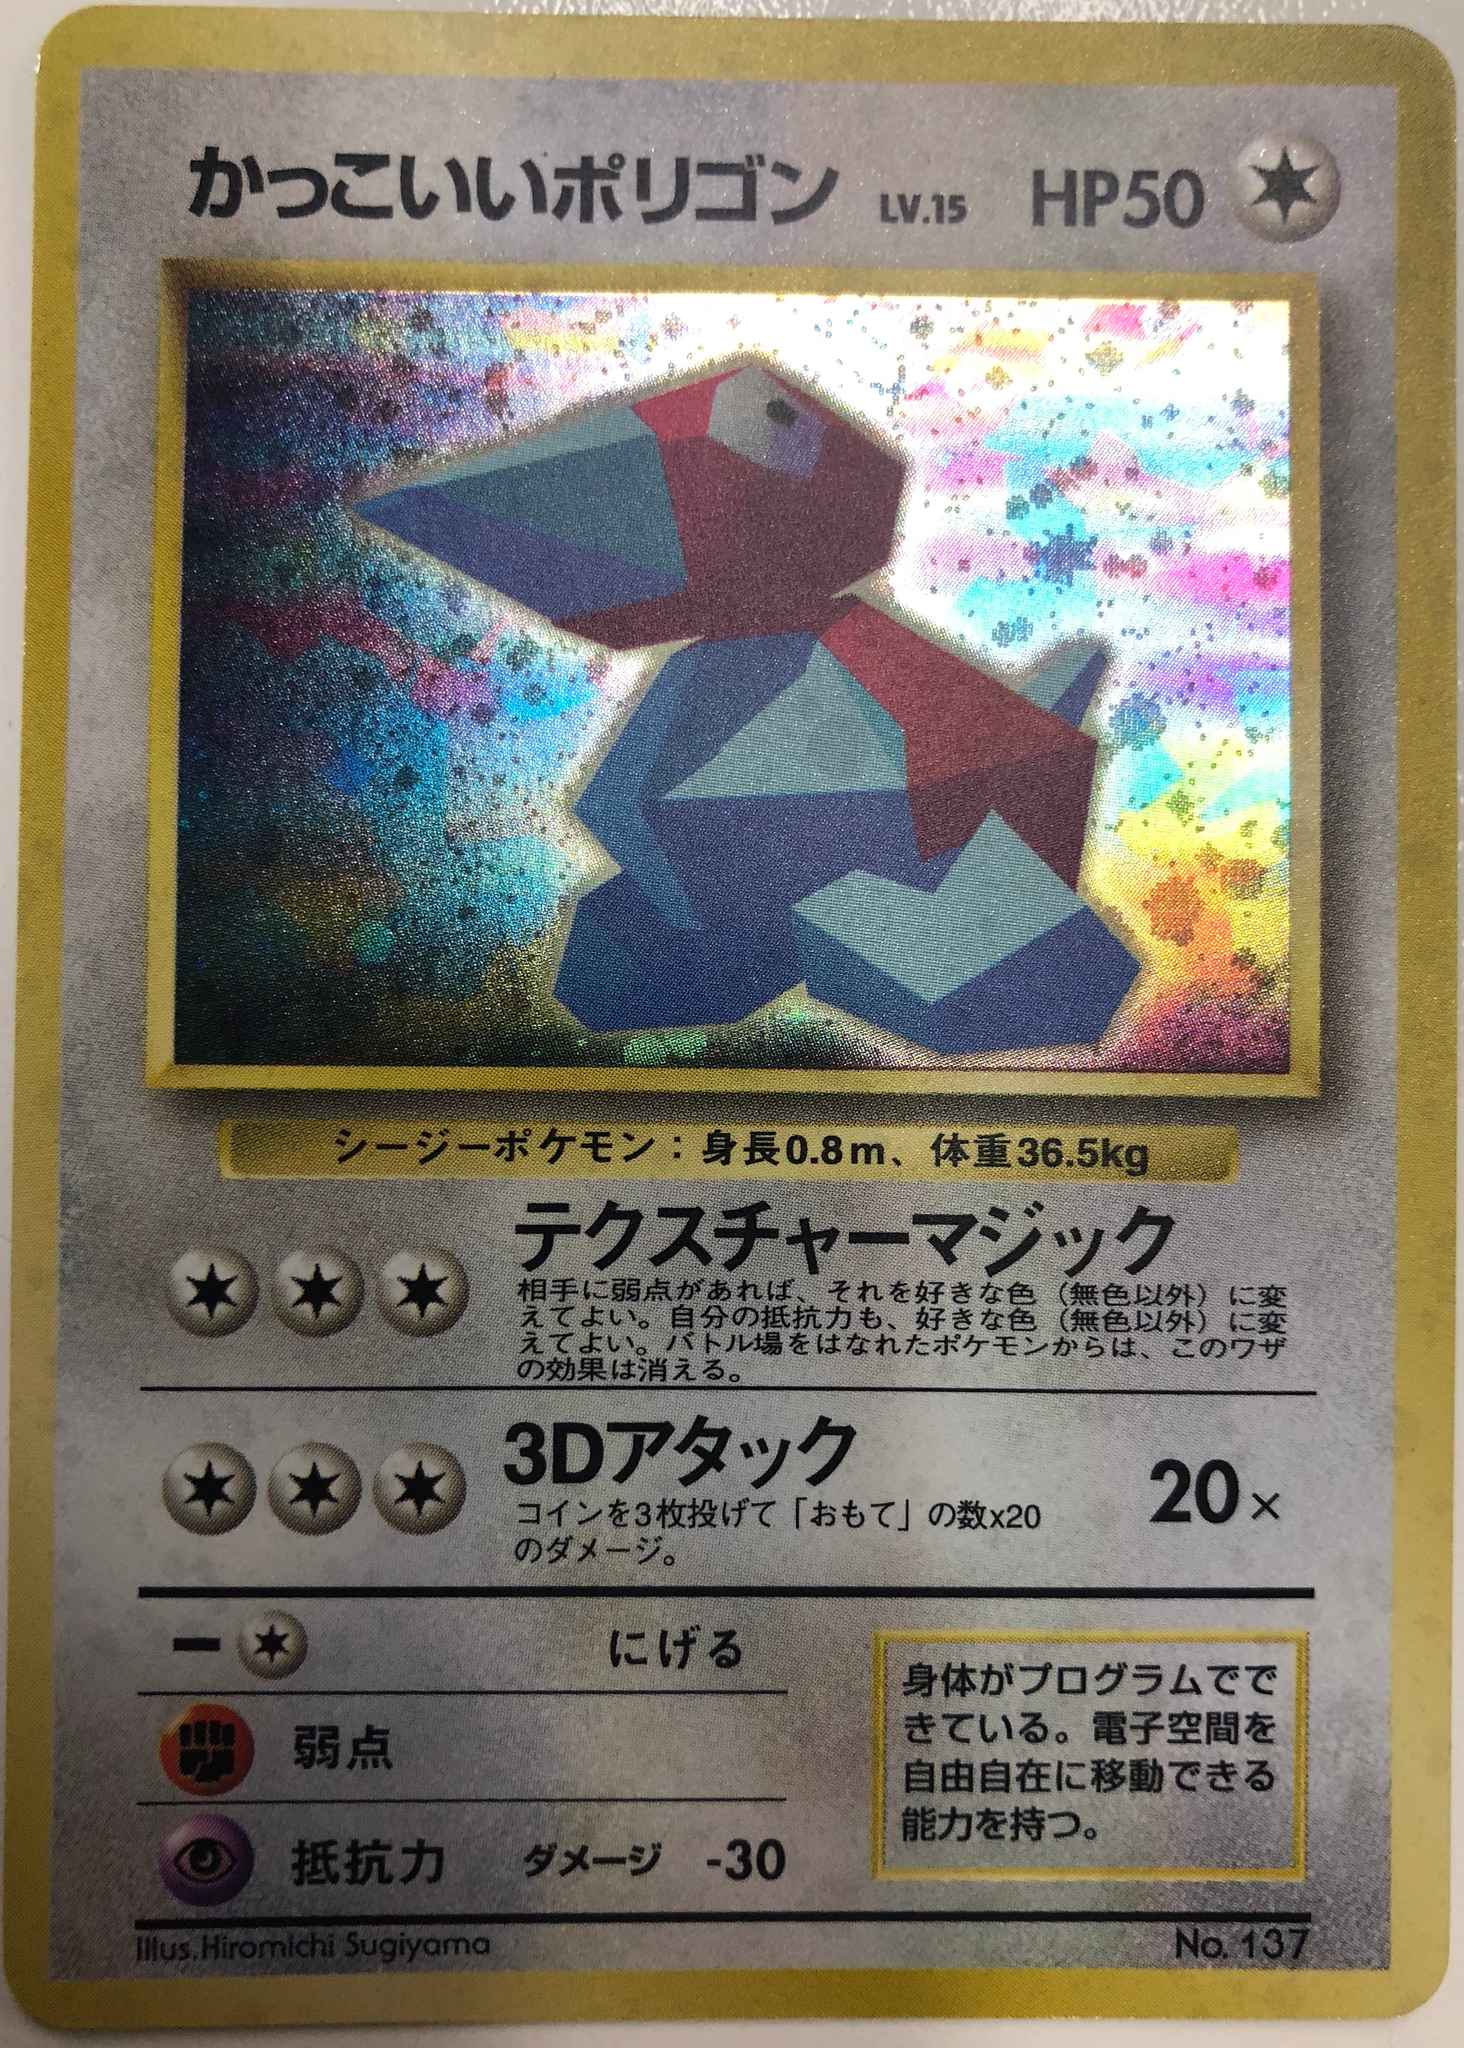 Cool Porygon Japanese No 137 Cool Porygon Wotc Promo Pokemon Online Gaming Store For Cards Miniatures Singles Packs Booster Boxes